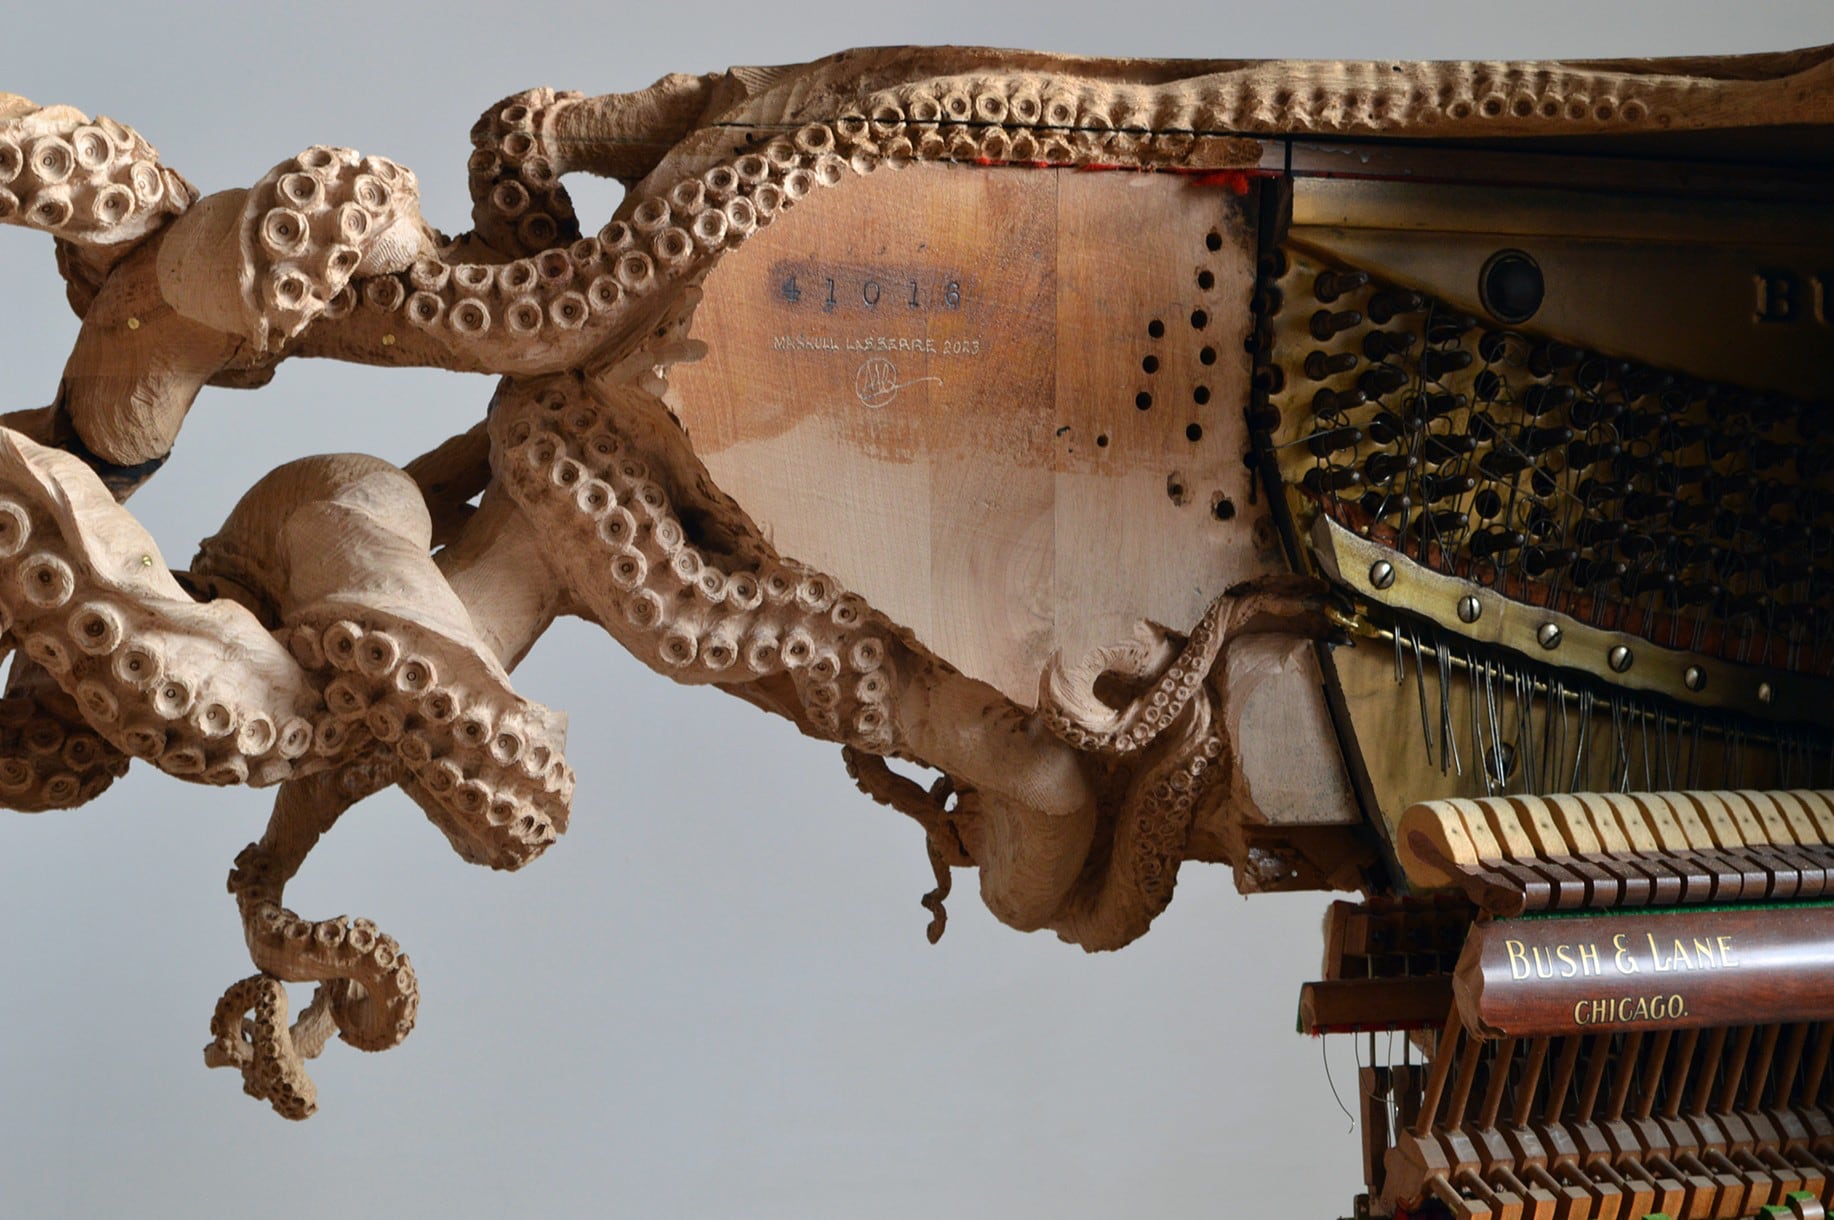 a detail image of a wooden carving of an octopus connecting to part of a piano